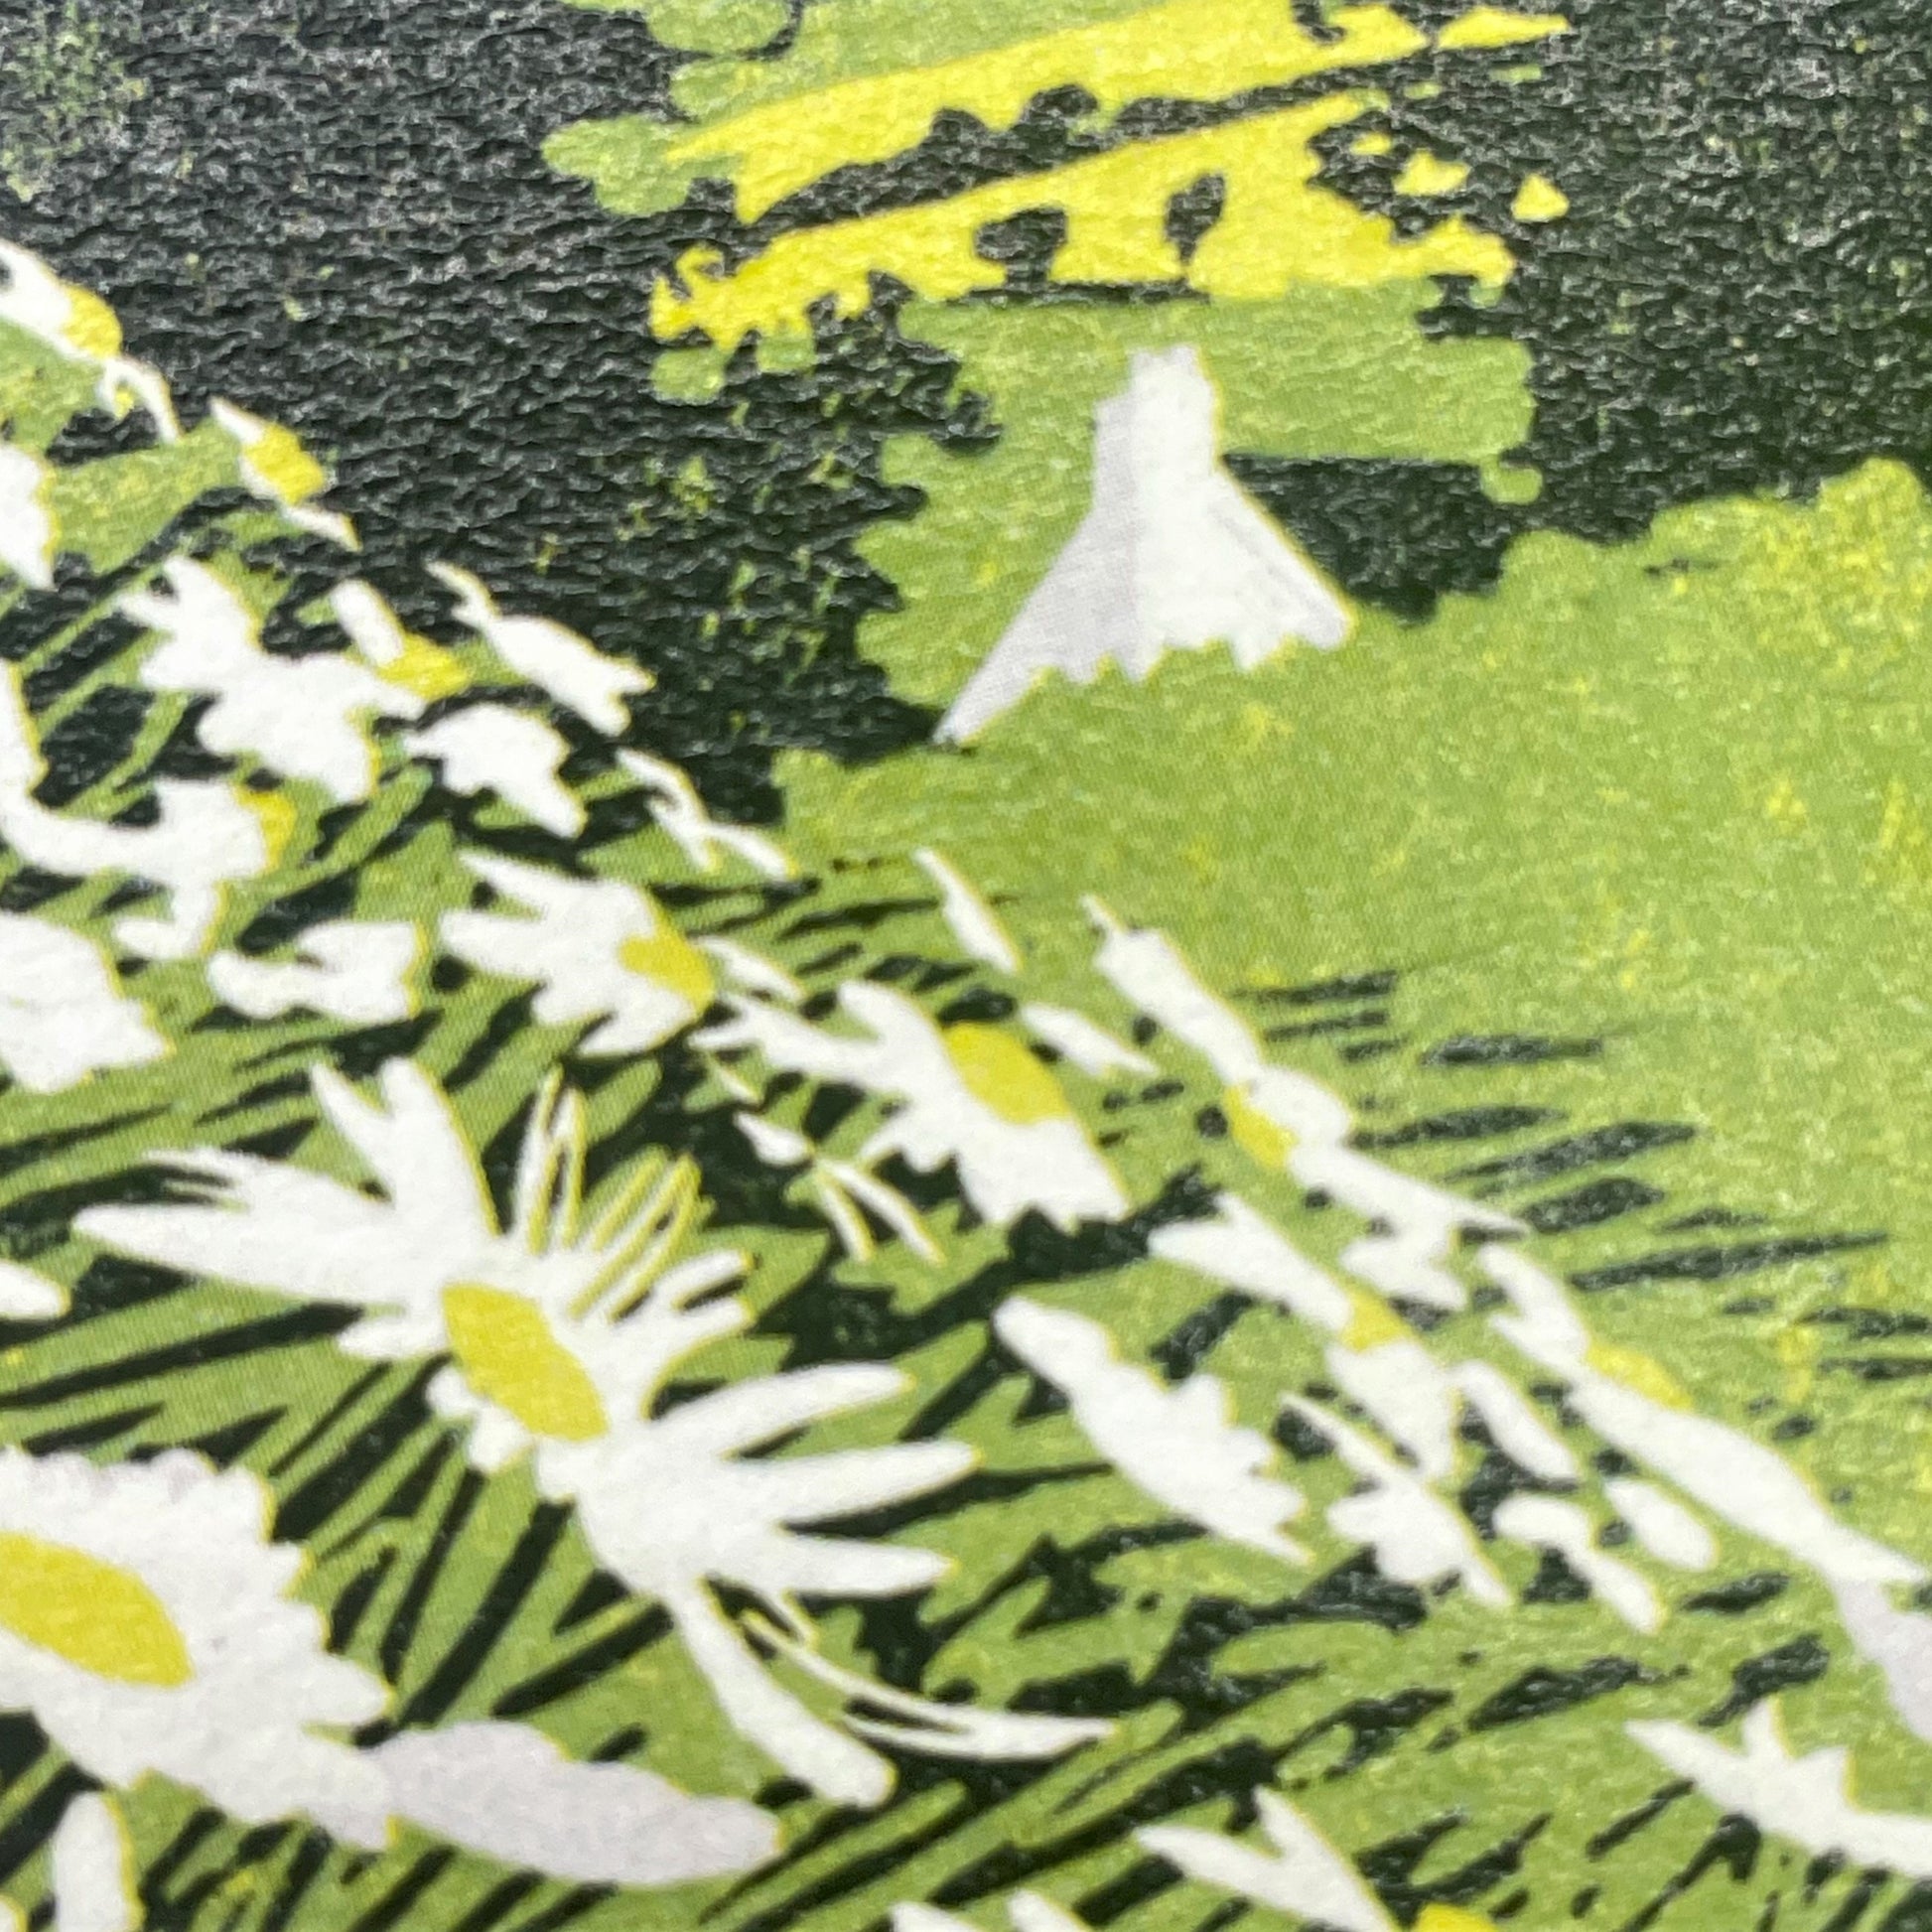 greetings card showing side of a hill covered in daisies, close-up of the daisies